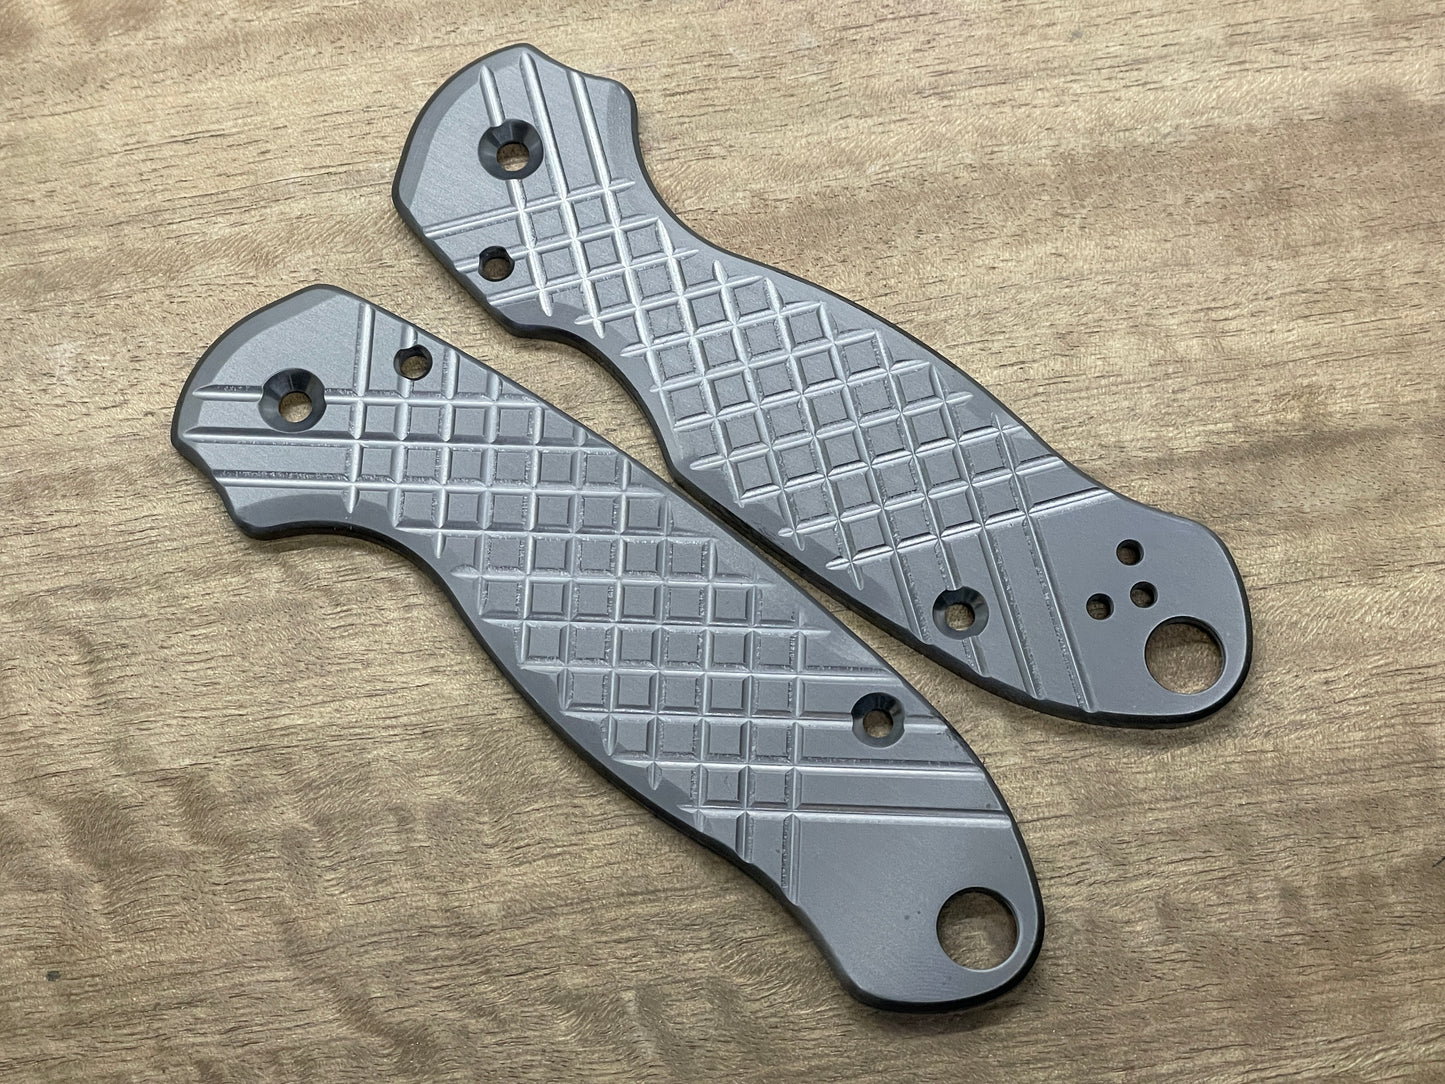 Brushed FRAG milled Zirconium scales for Spyderco Para 3